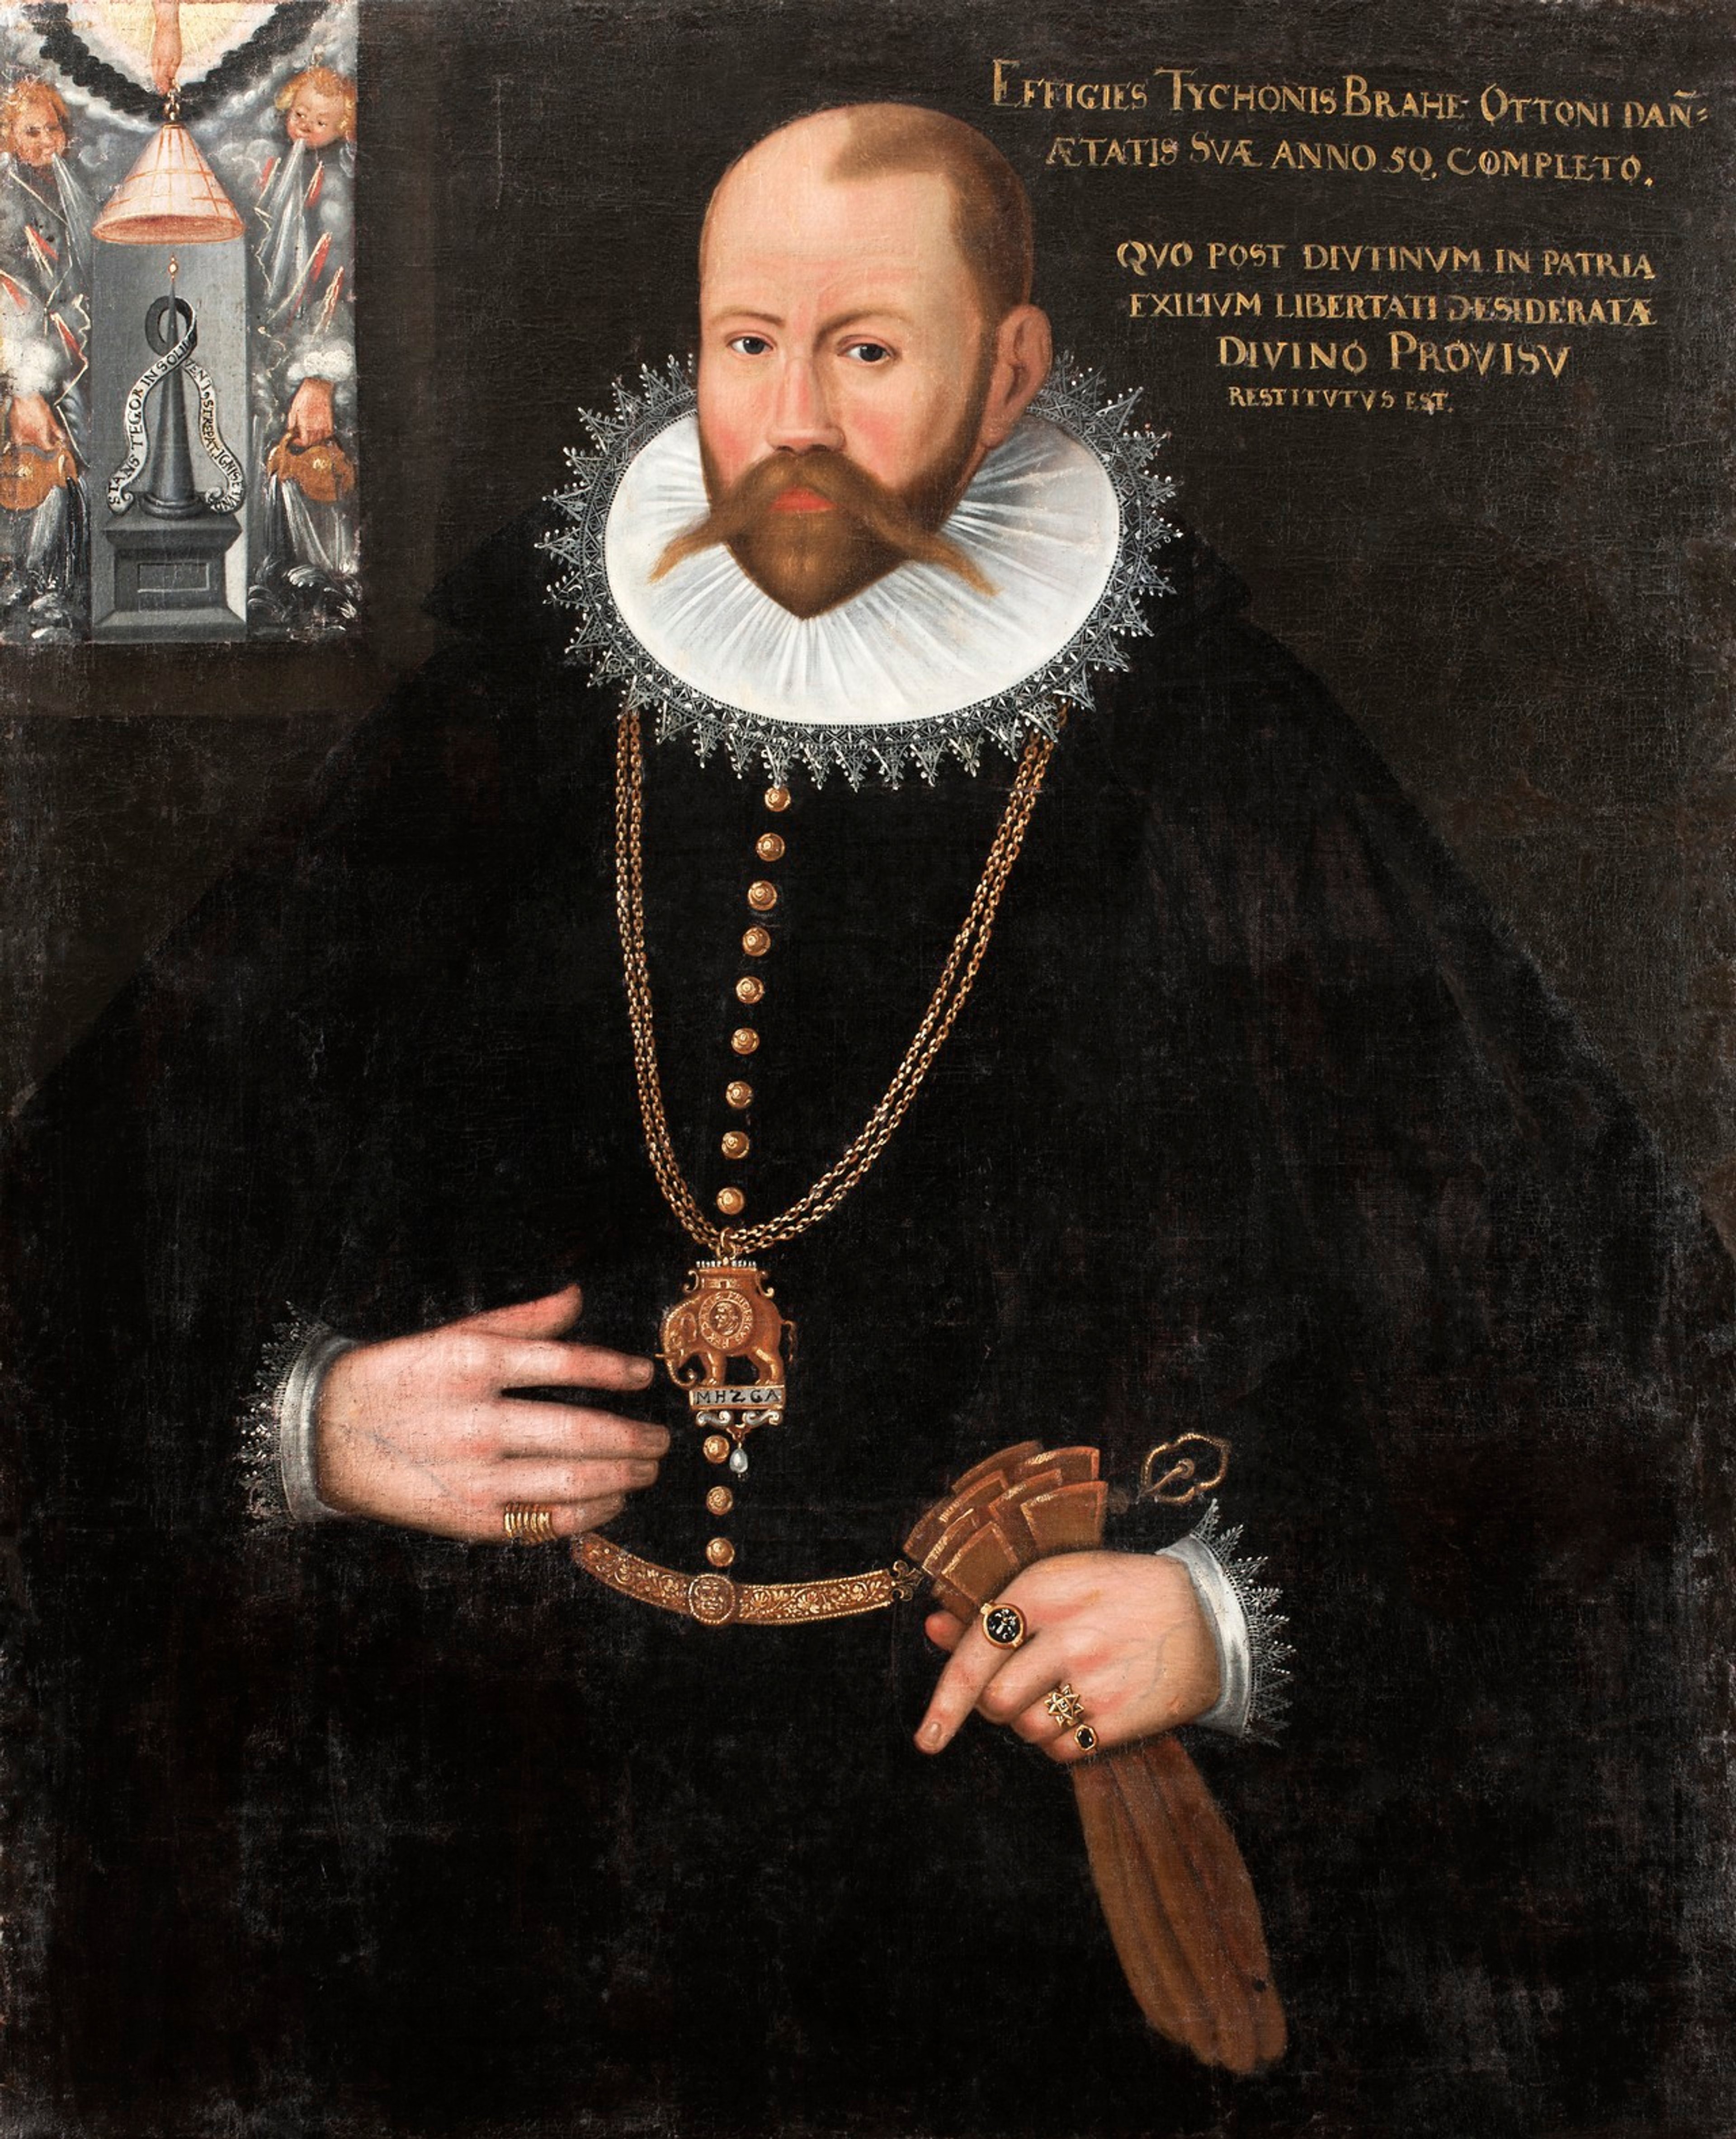 Painted portrait of Tycho Brahe, dressed in fine clothes and holding a pair of gloves in his left hand.